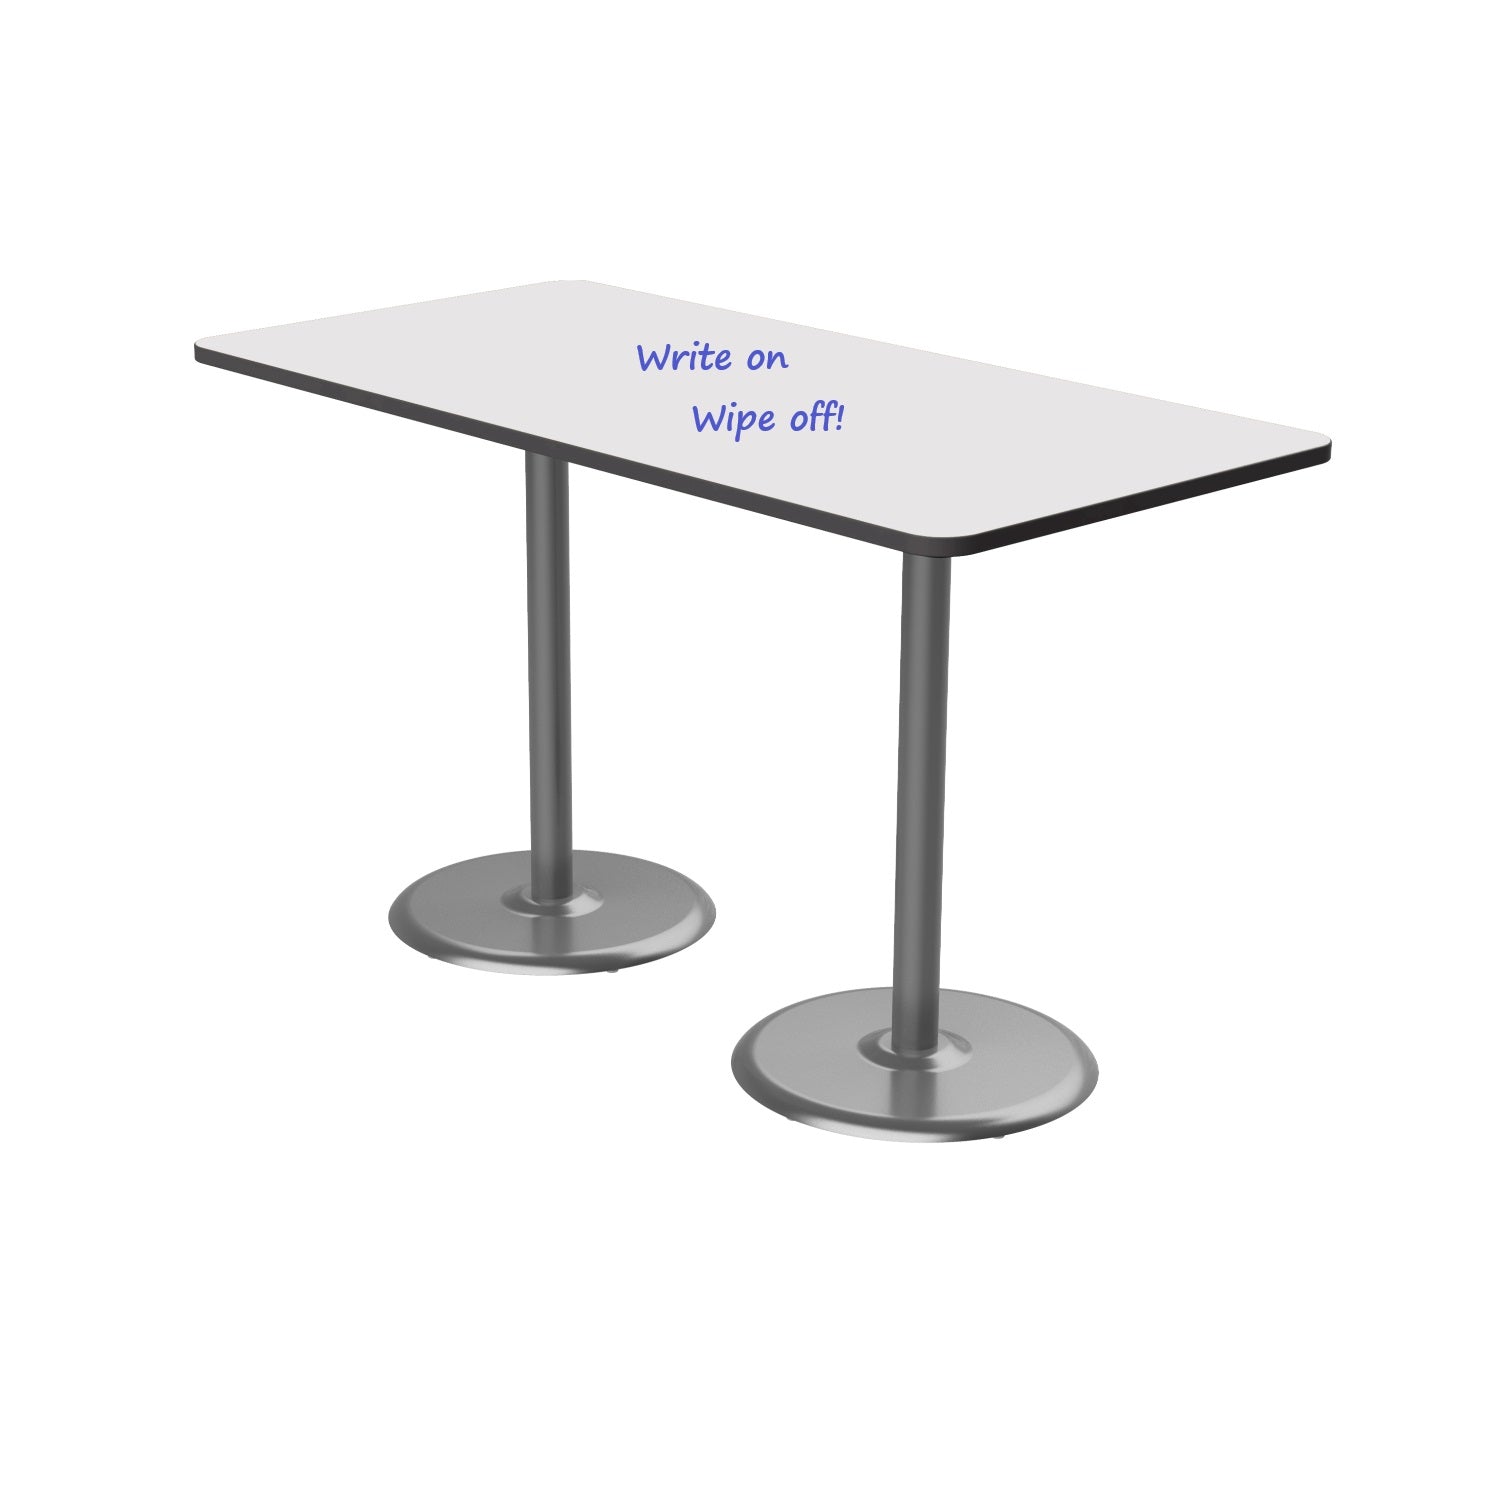 Dual Base Standing Height 36" x 72" Rectangle Cafe Table with Dry-Erase Whiteboard Top